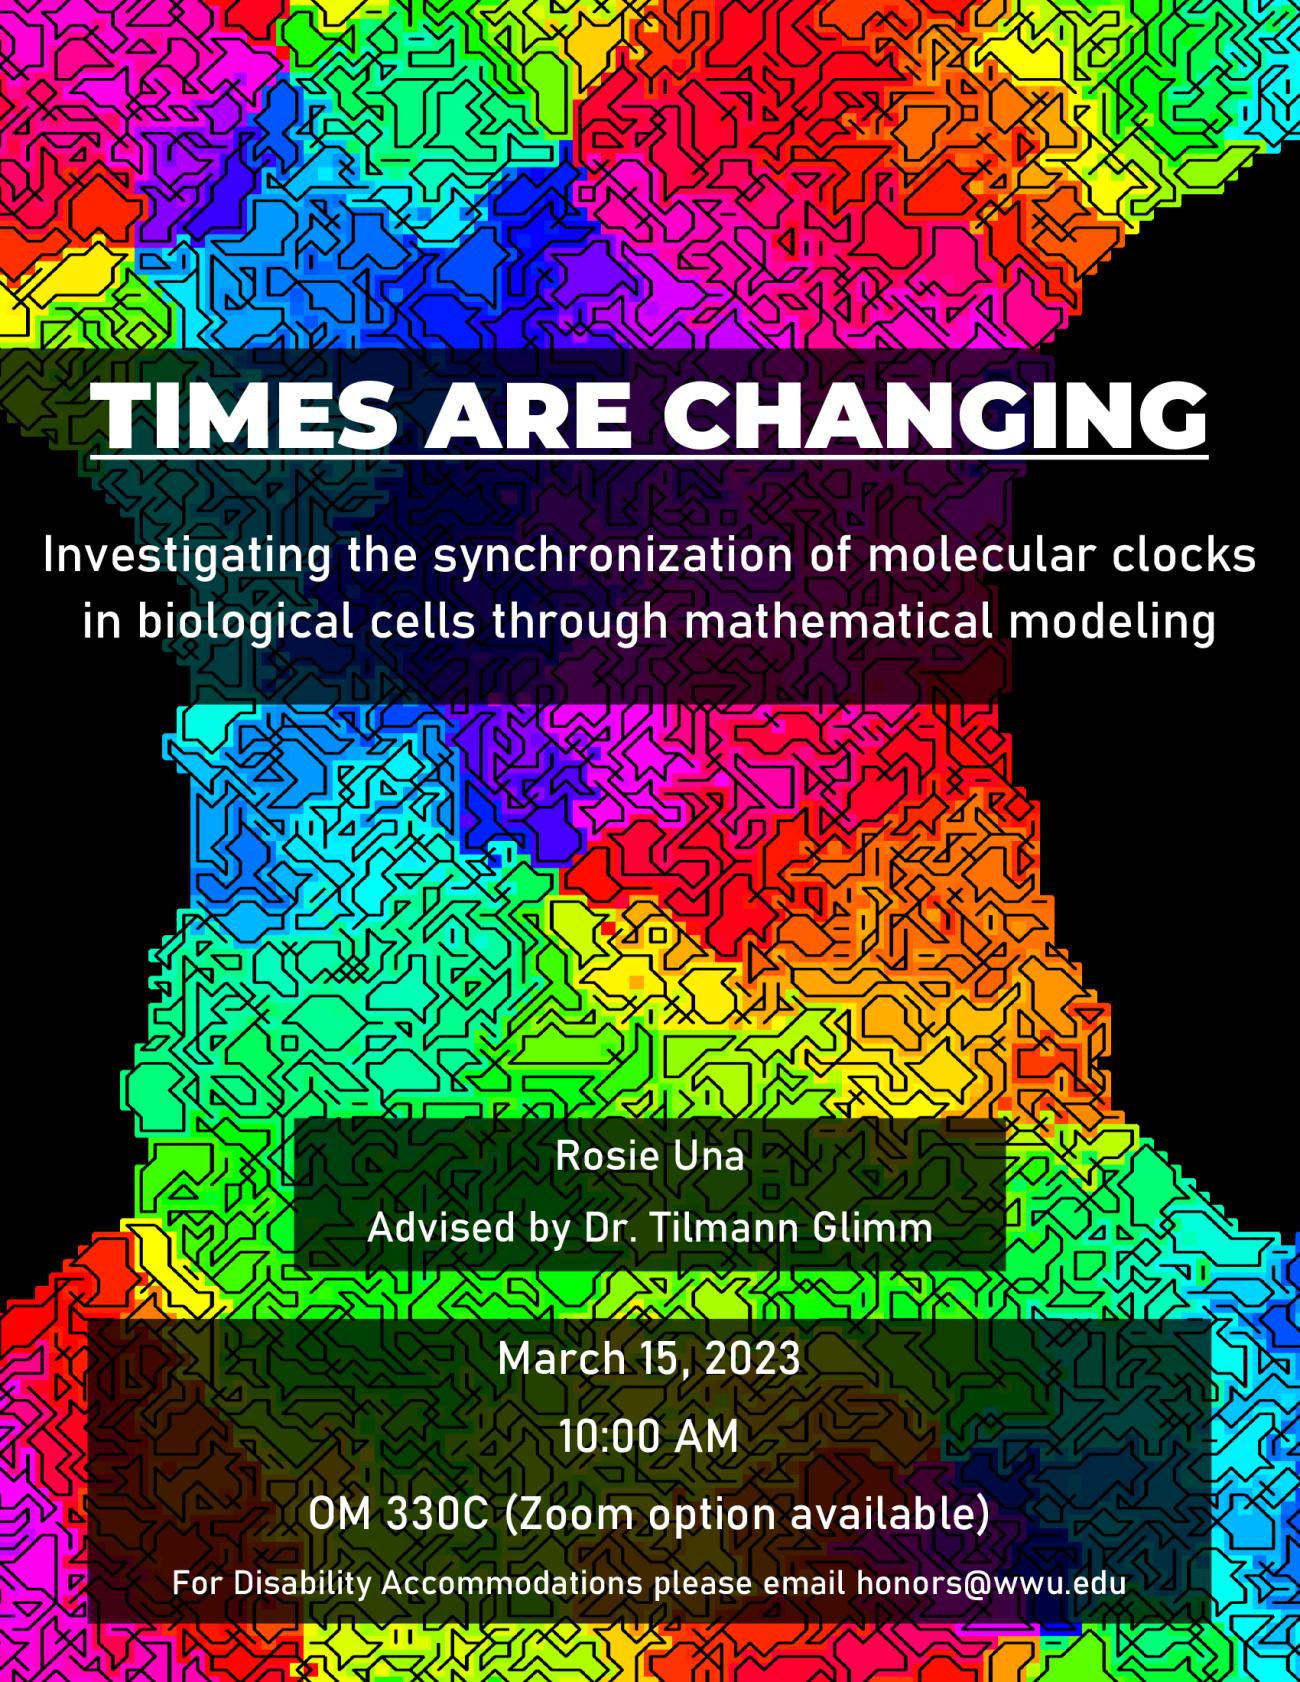 A black poster with rainbow-colored pixelized cells synchronizing their colors. The text reads "Times are Changing: Investing synchronization of molecular clocks in biological cells through mathematical modeling. Rosie Una. Advised by Dr. Tilmann Glimm. March 15, 2023. 10:00 AM. OM 330C, Zoom option available. For disability accommodations please email honors@wwu.edu"